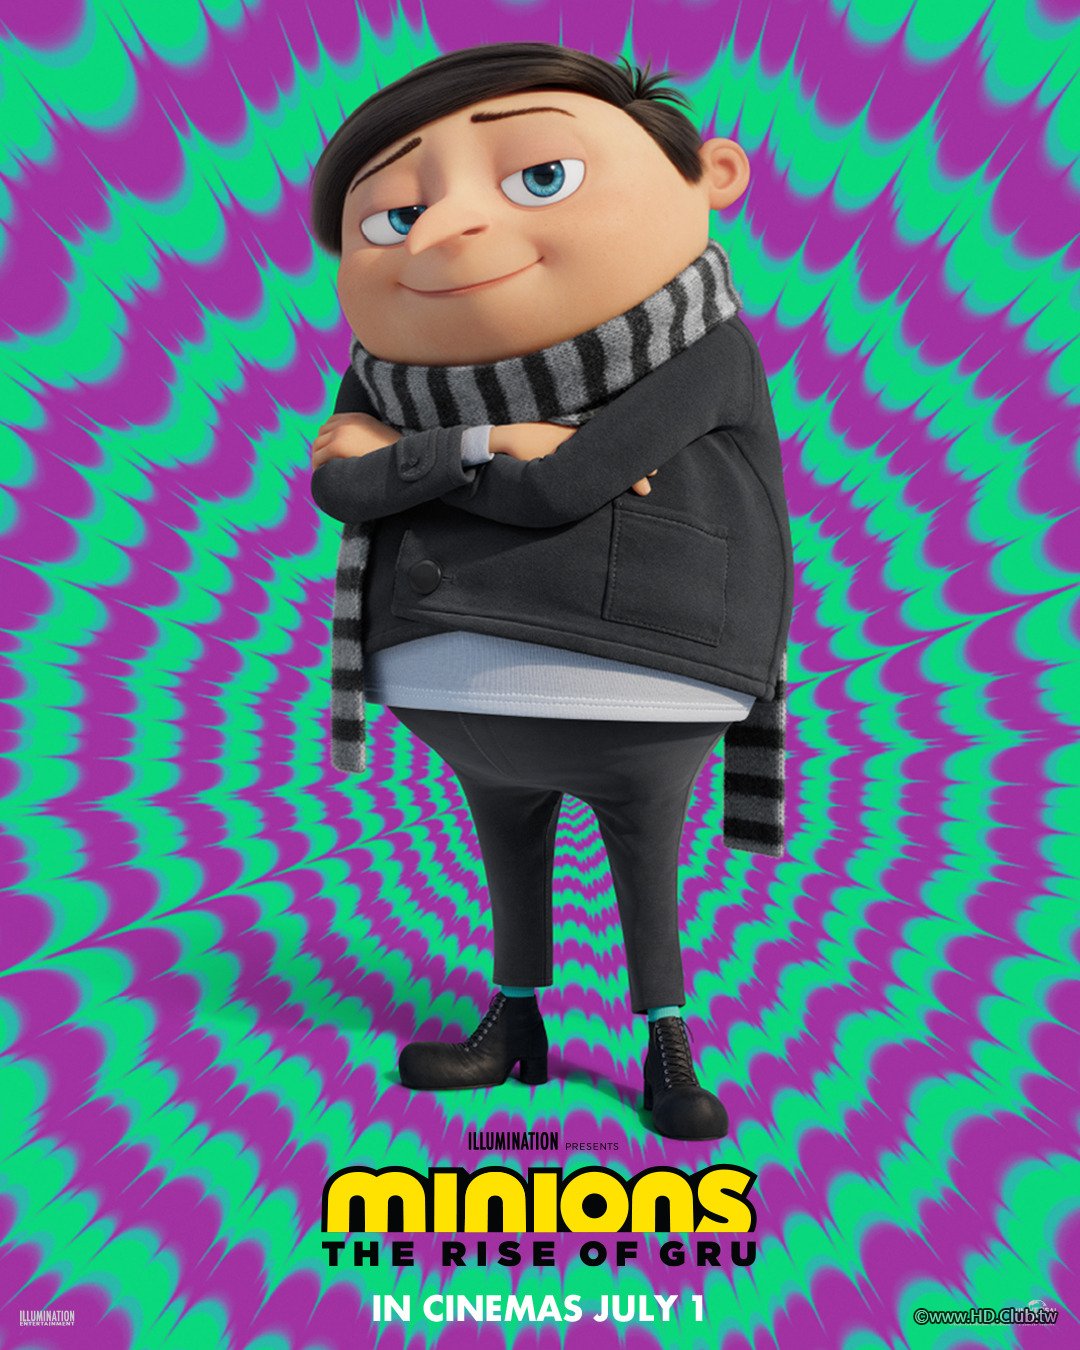 minions_the_rise_of_gru_ver7_xlg.jpg